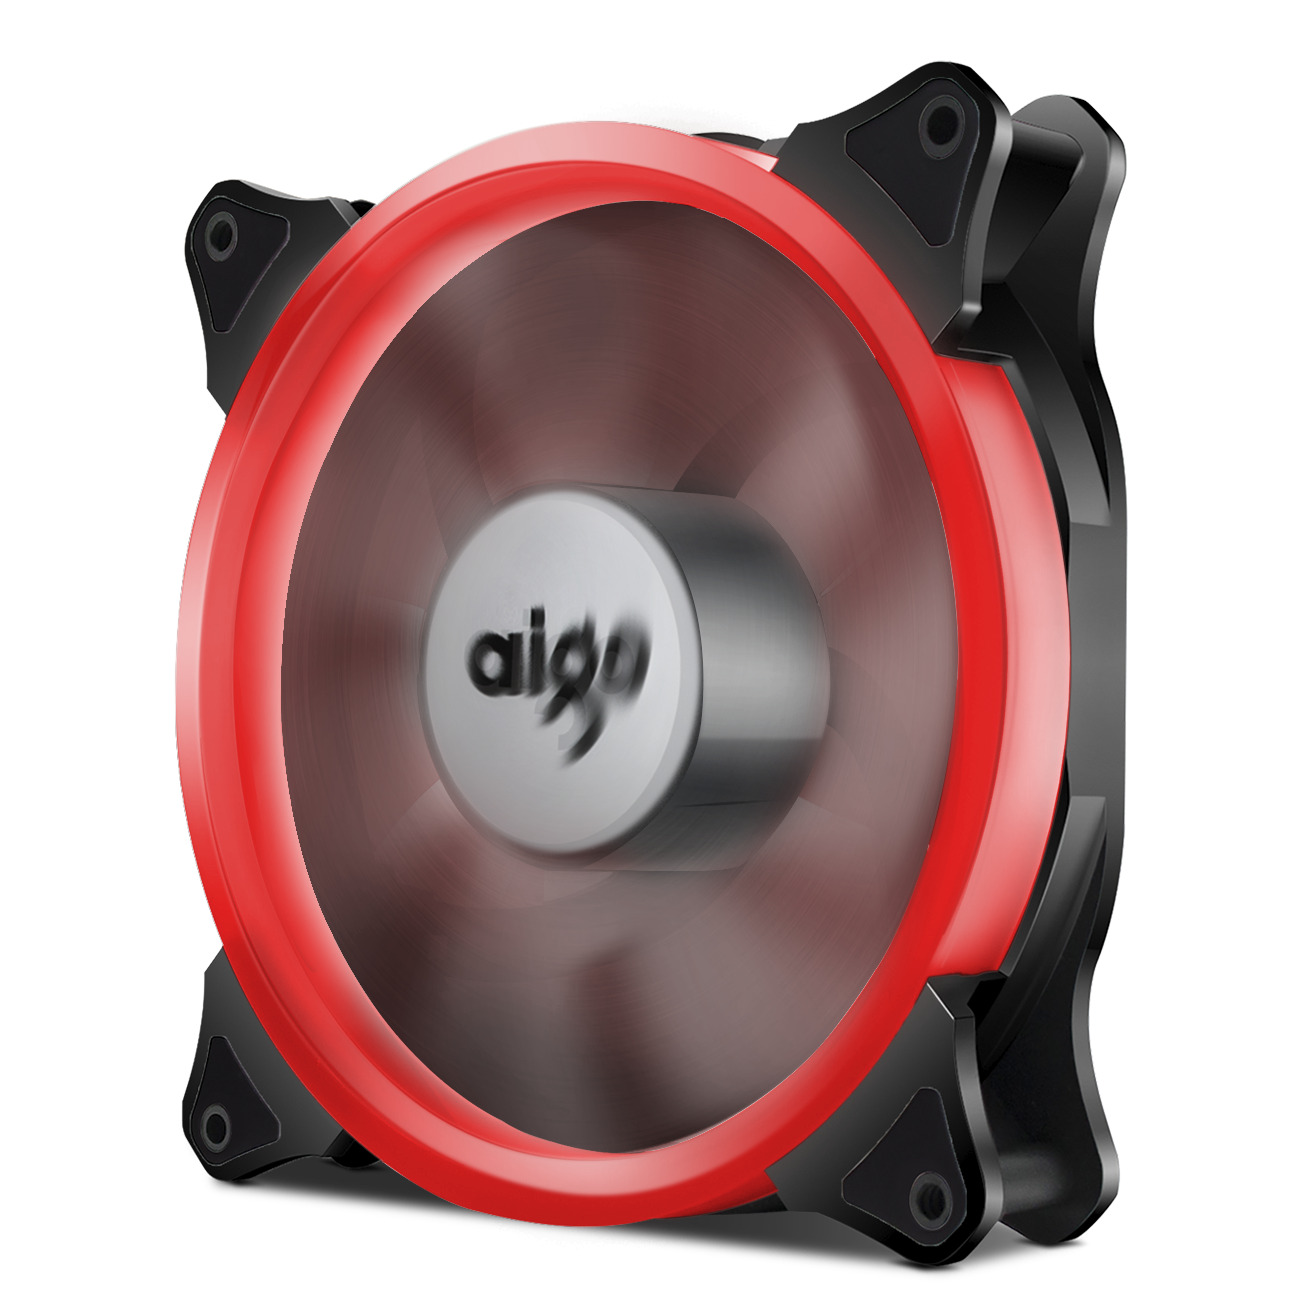 Aigo Red Halo 140mm LED PC CPU Gaming Computer Case Cooling Neon Clear Fan Mod